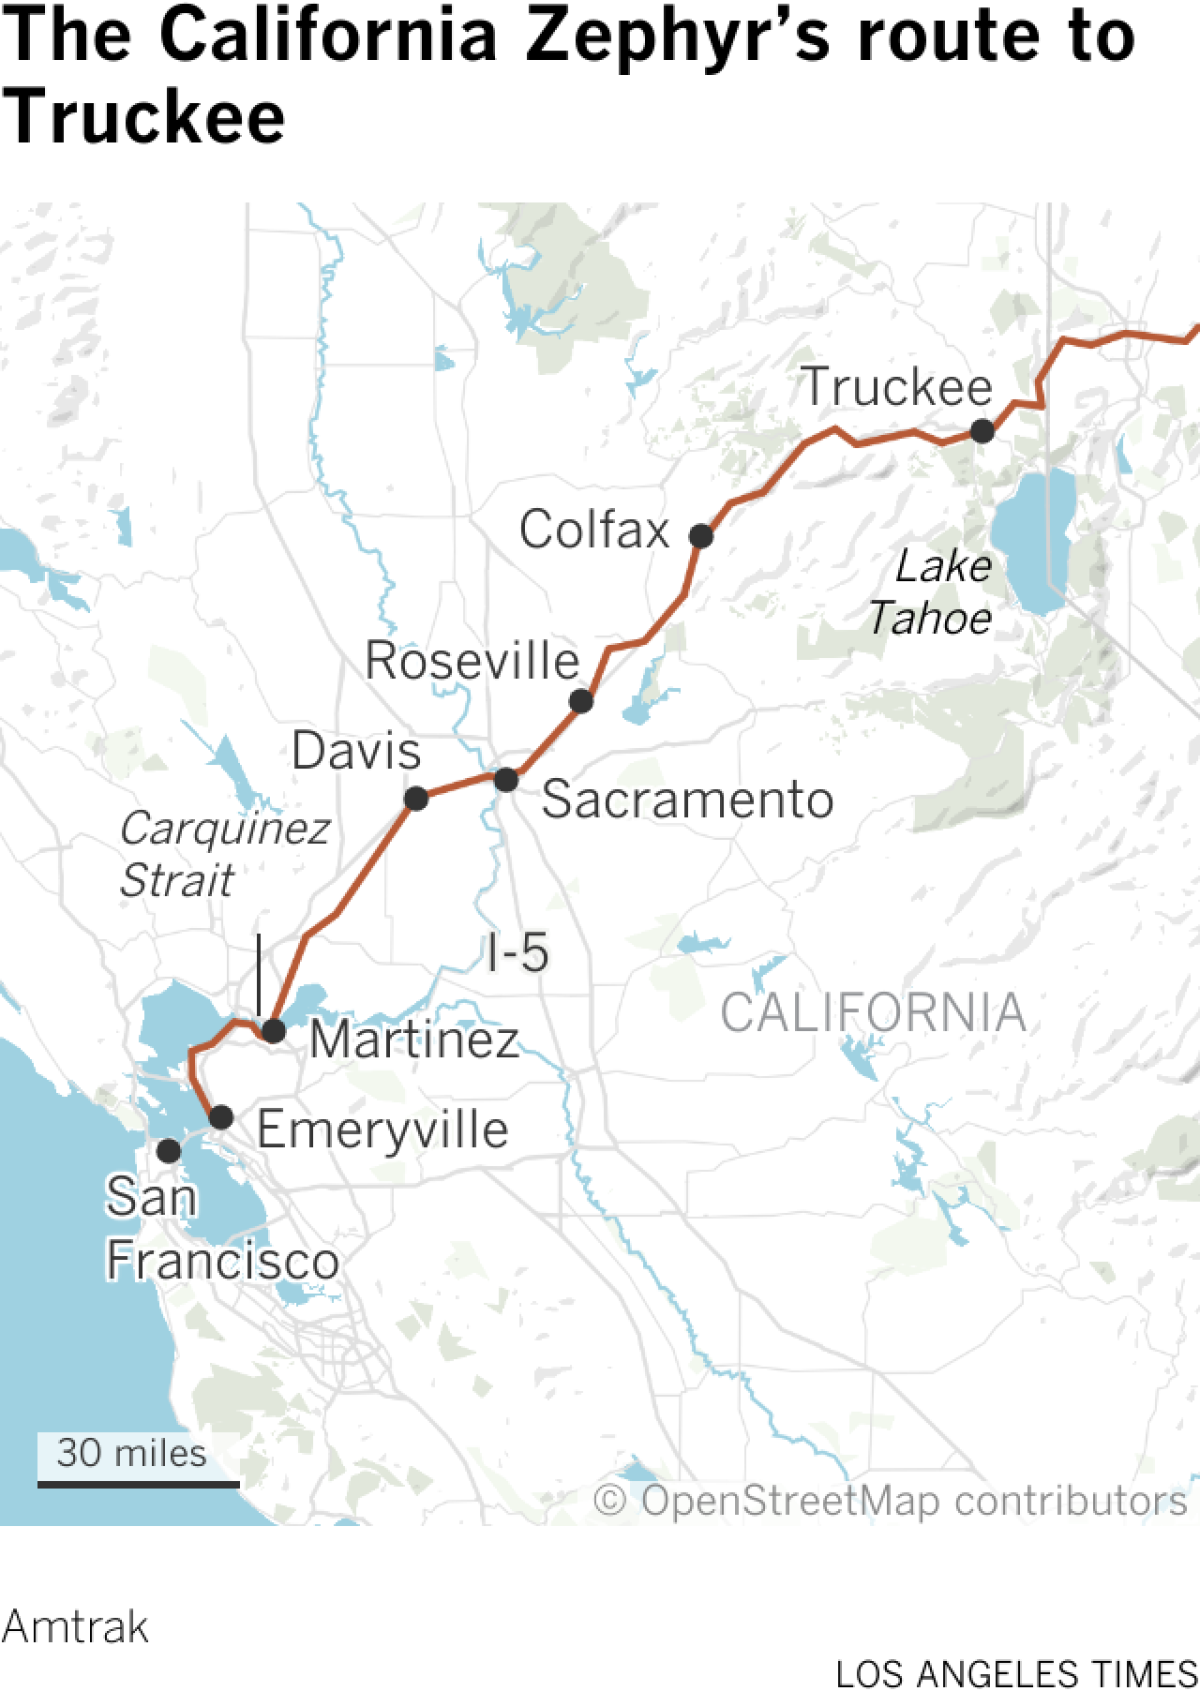 Map shows the route of Amtrak's California Zephyr from Emeryville through Truckee, north of Lake Tahoe.